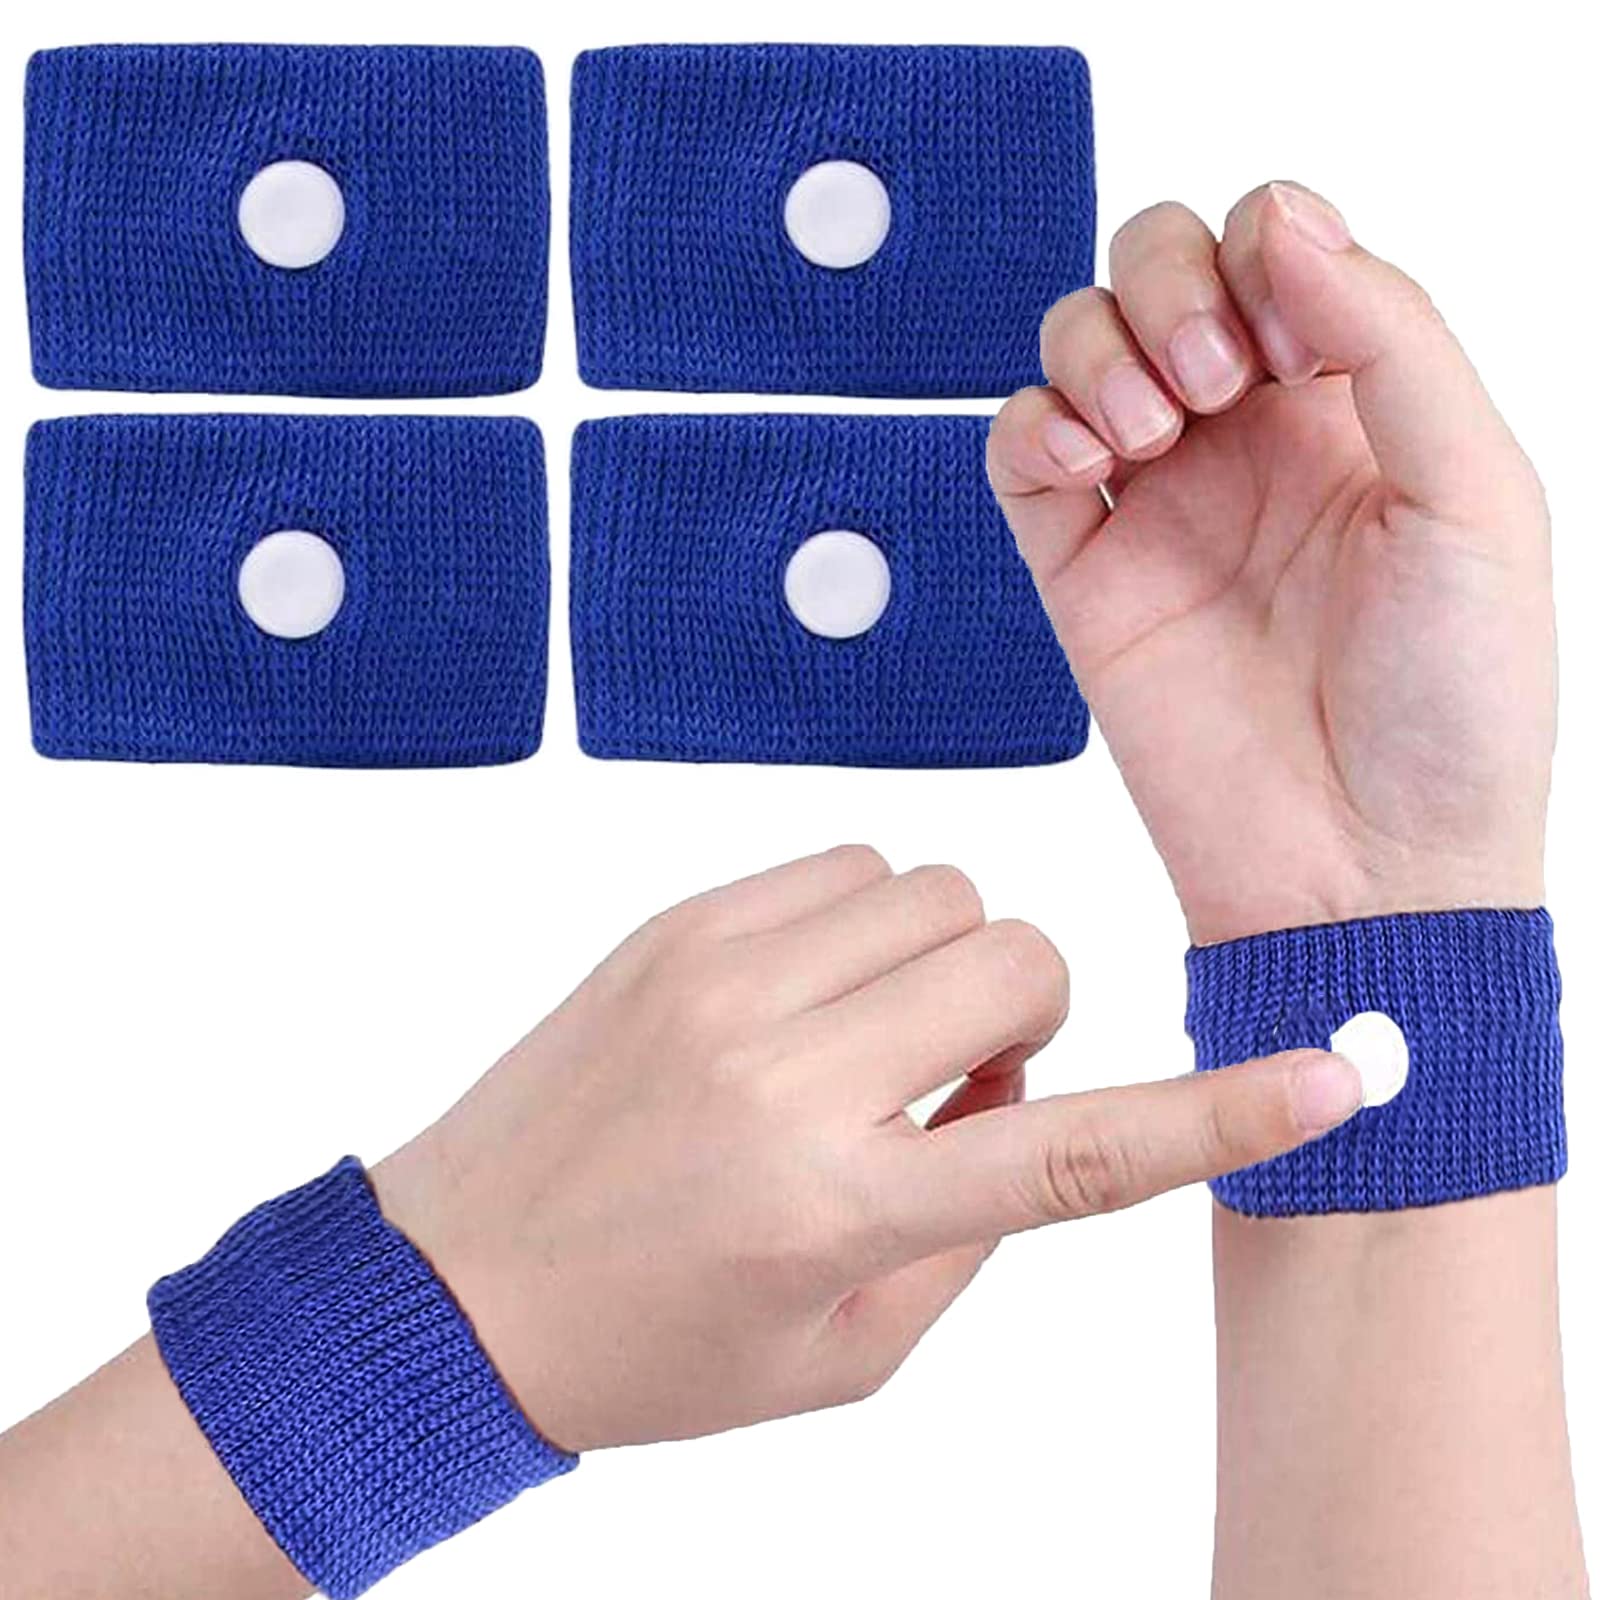 AAA.com | Smooth Trip Travel Wrist Motion Sickness Bands - 2 Pack